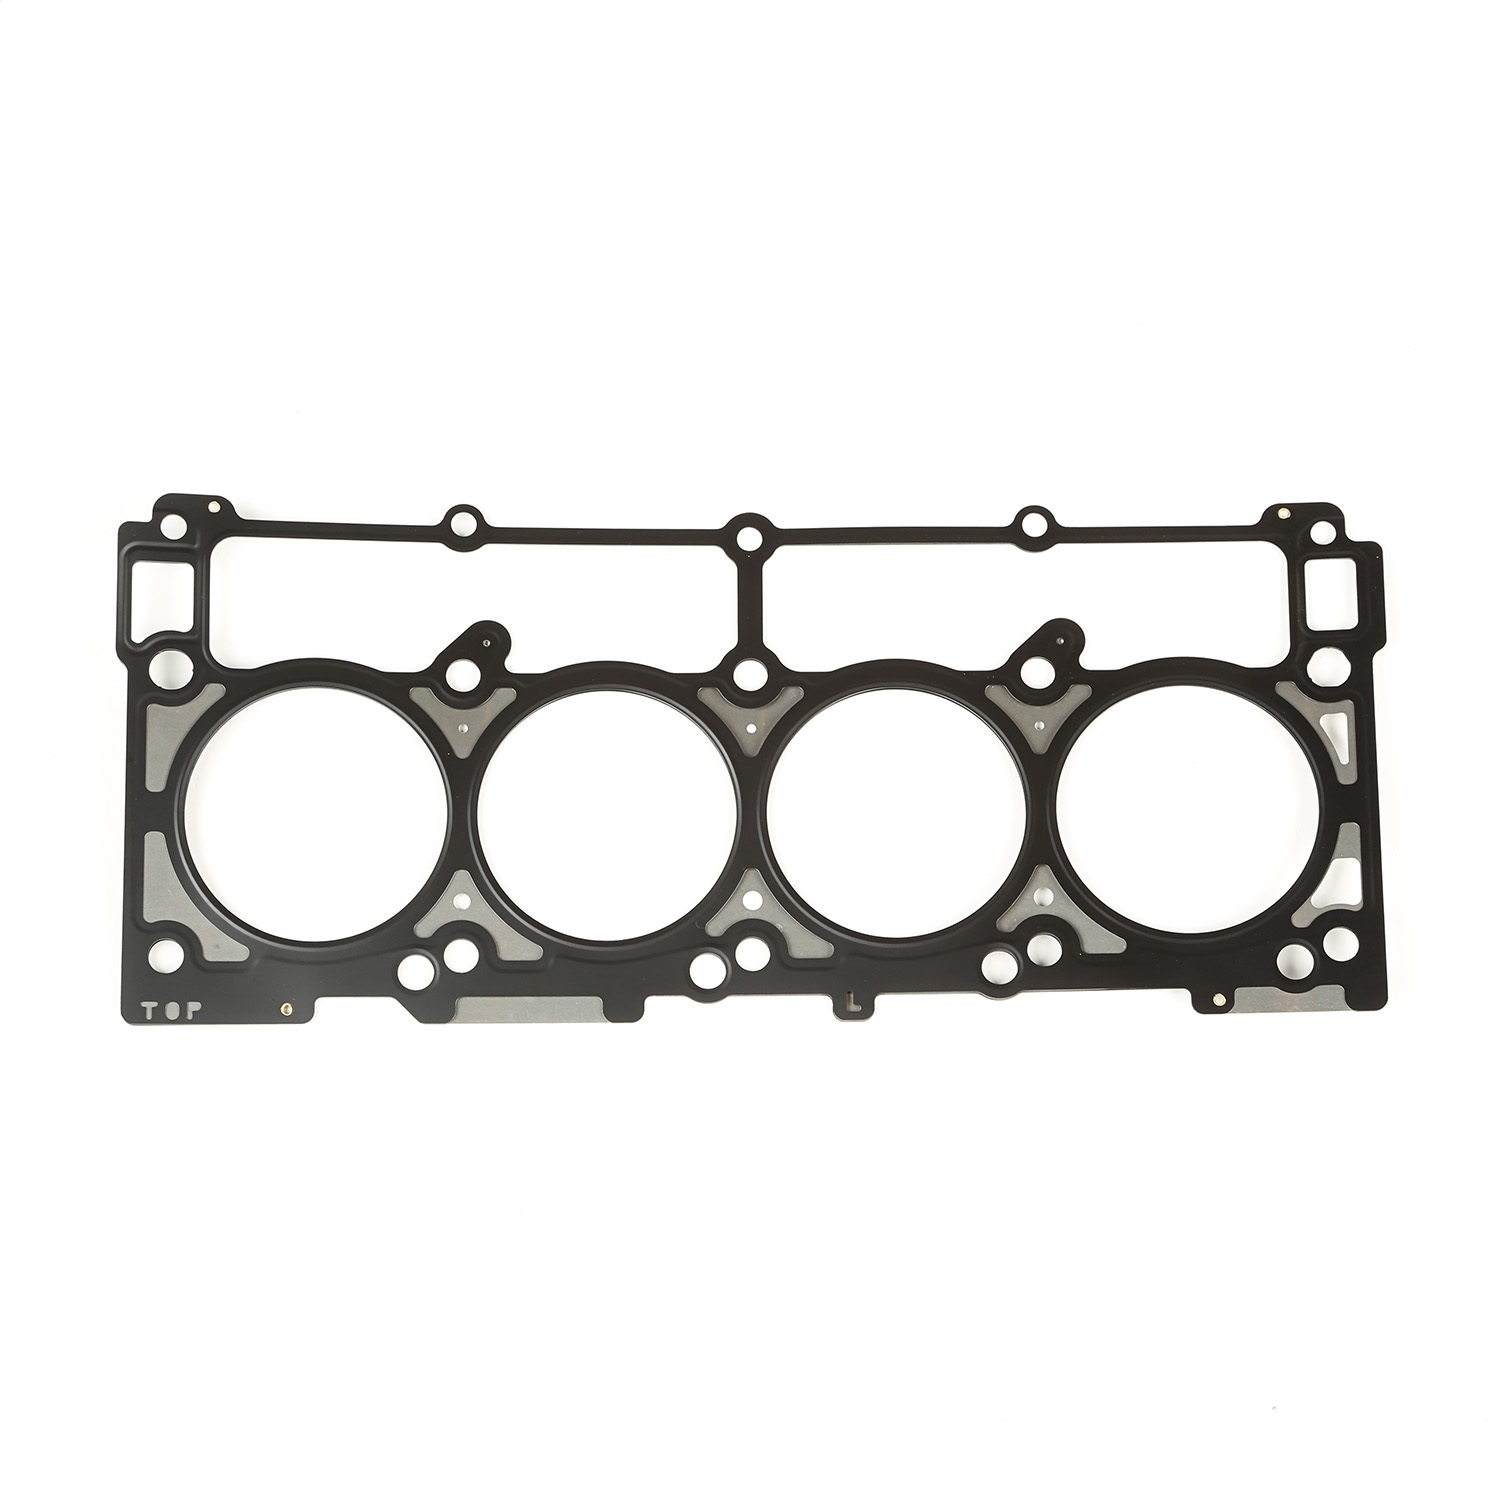 Omix This Left Cylinder Head Gasket From Omix Fits 5.7L Engines Found In 06-08 Commander And 05-08